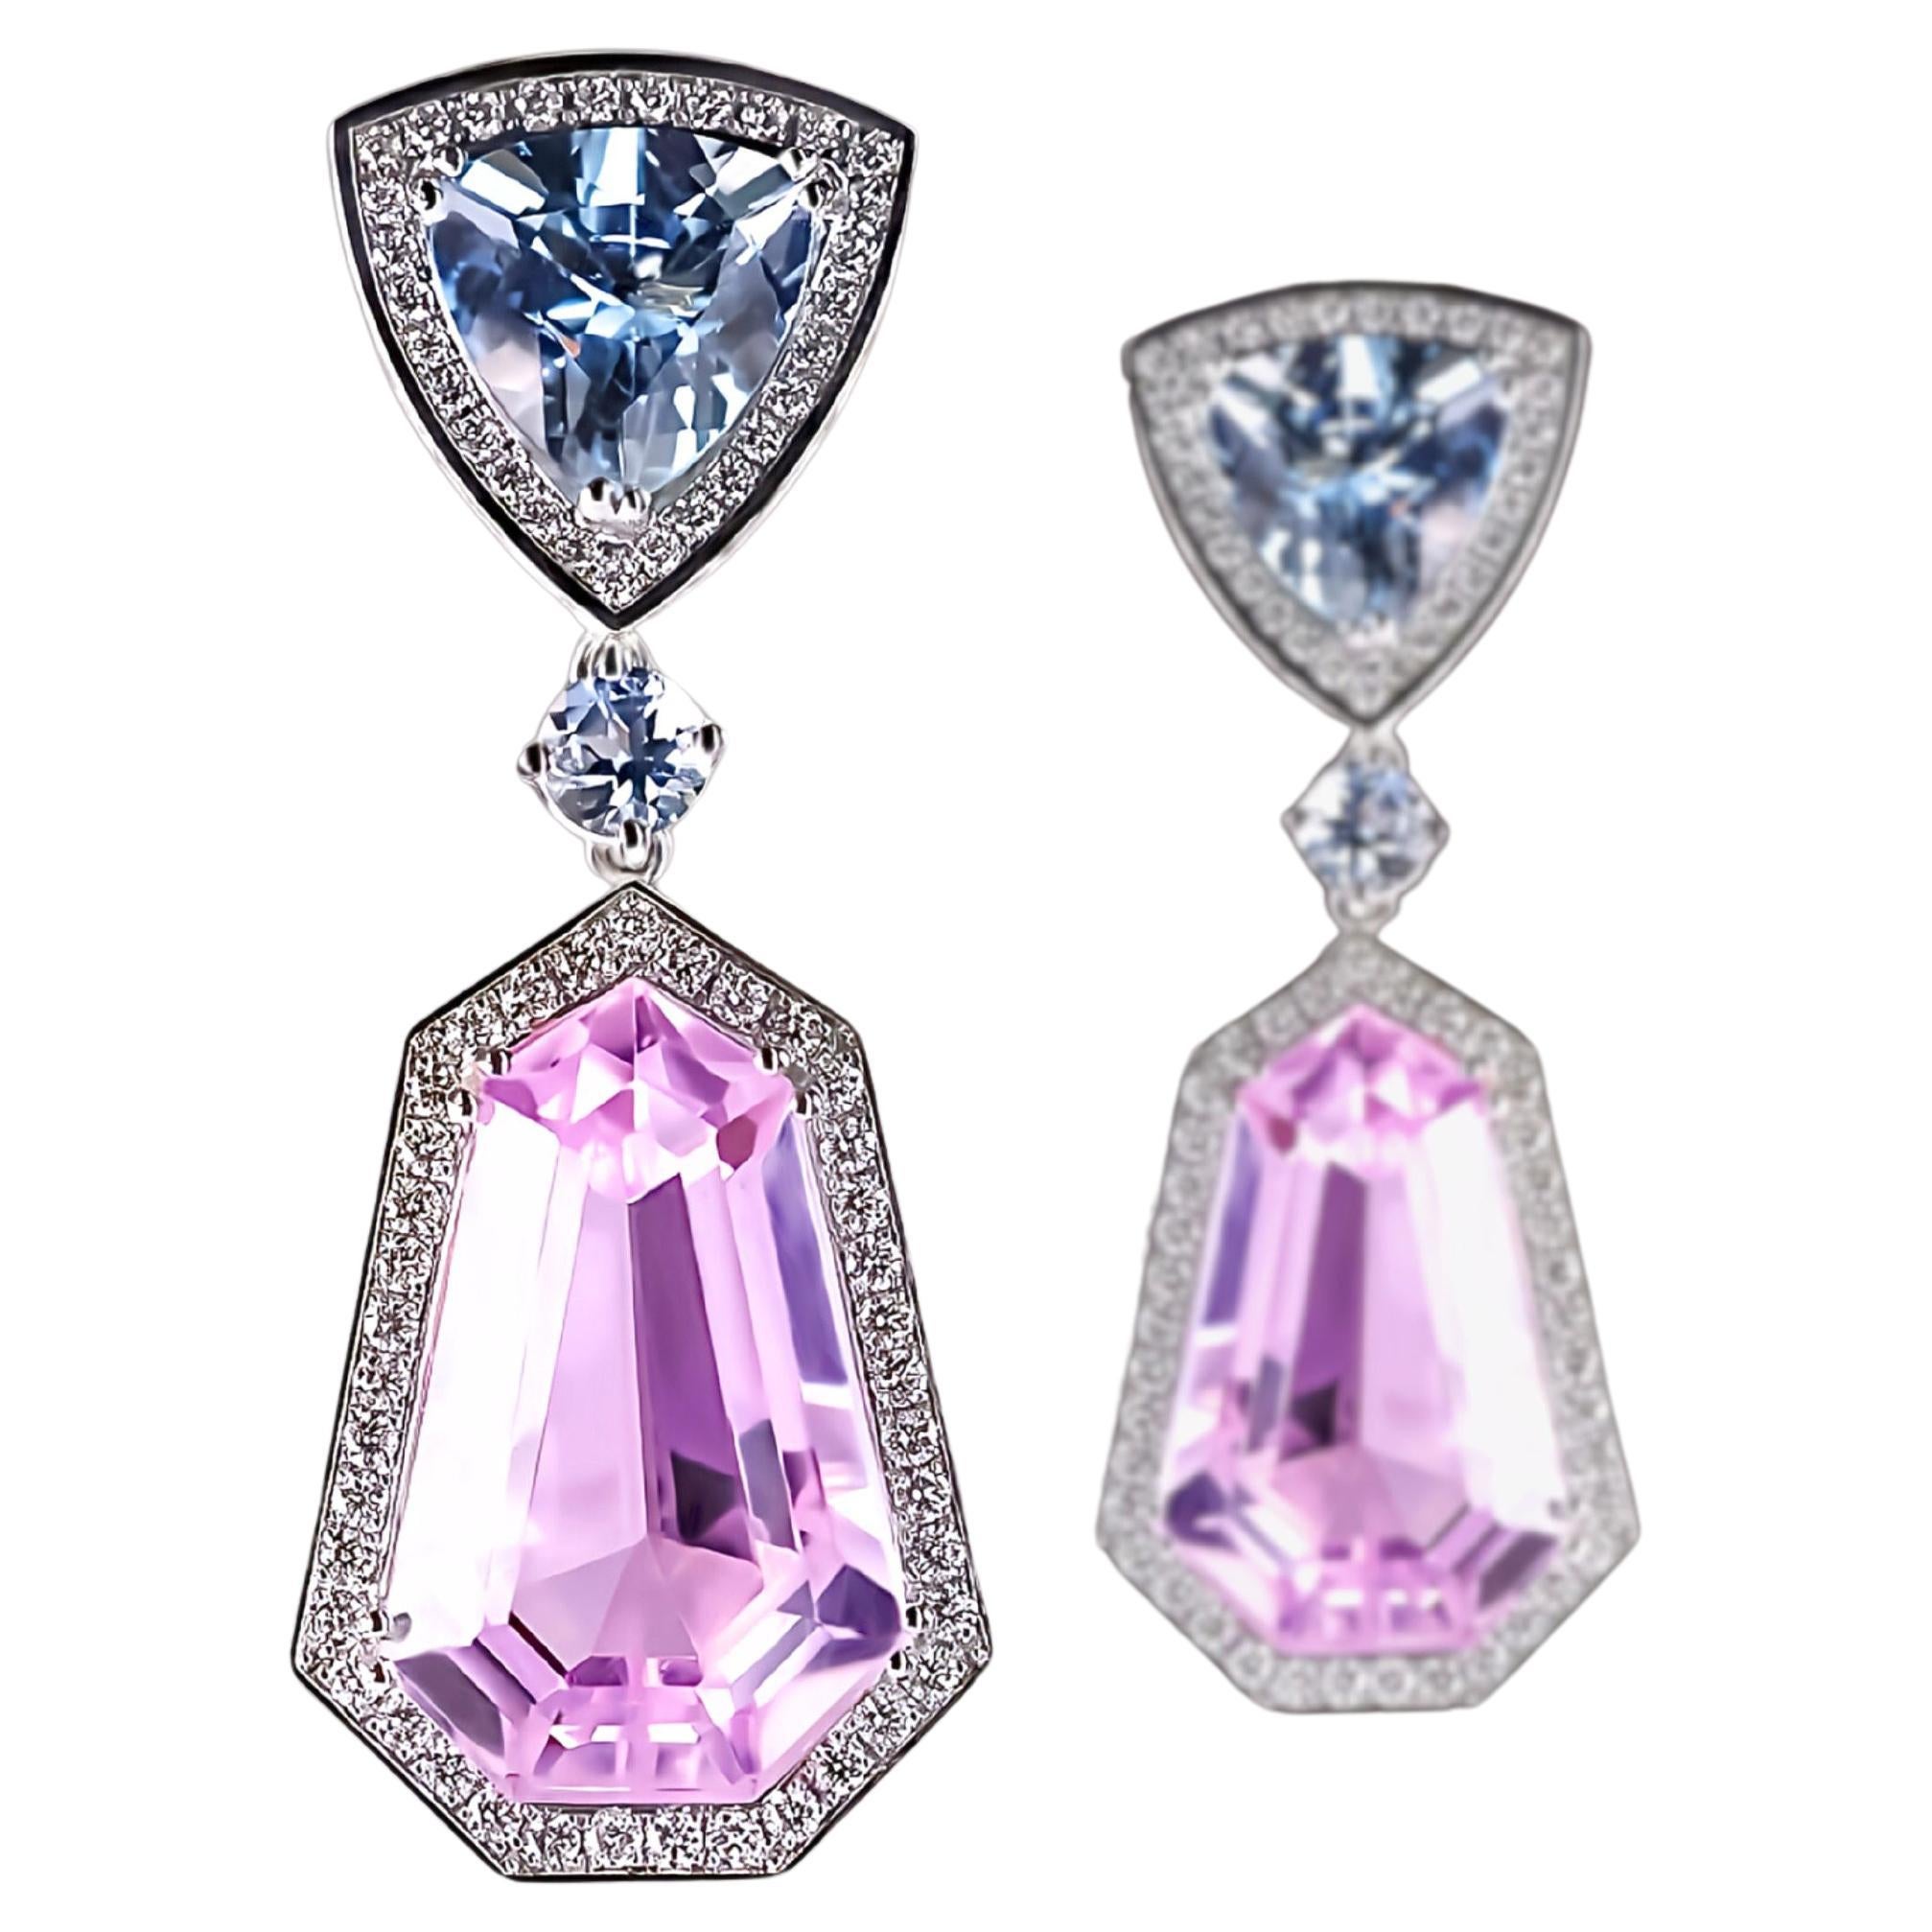 Gem Symphony: Aquamarine and Kunzite - 18kt Gold Earring Masterpieces For Sale